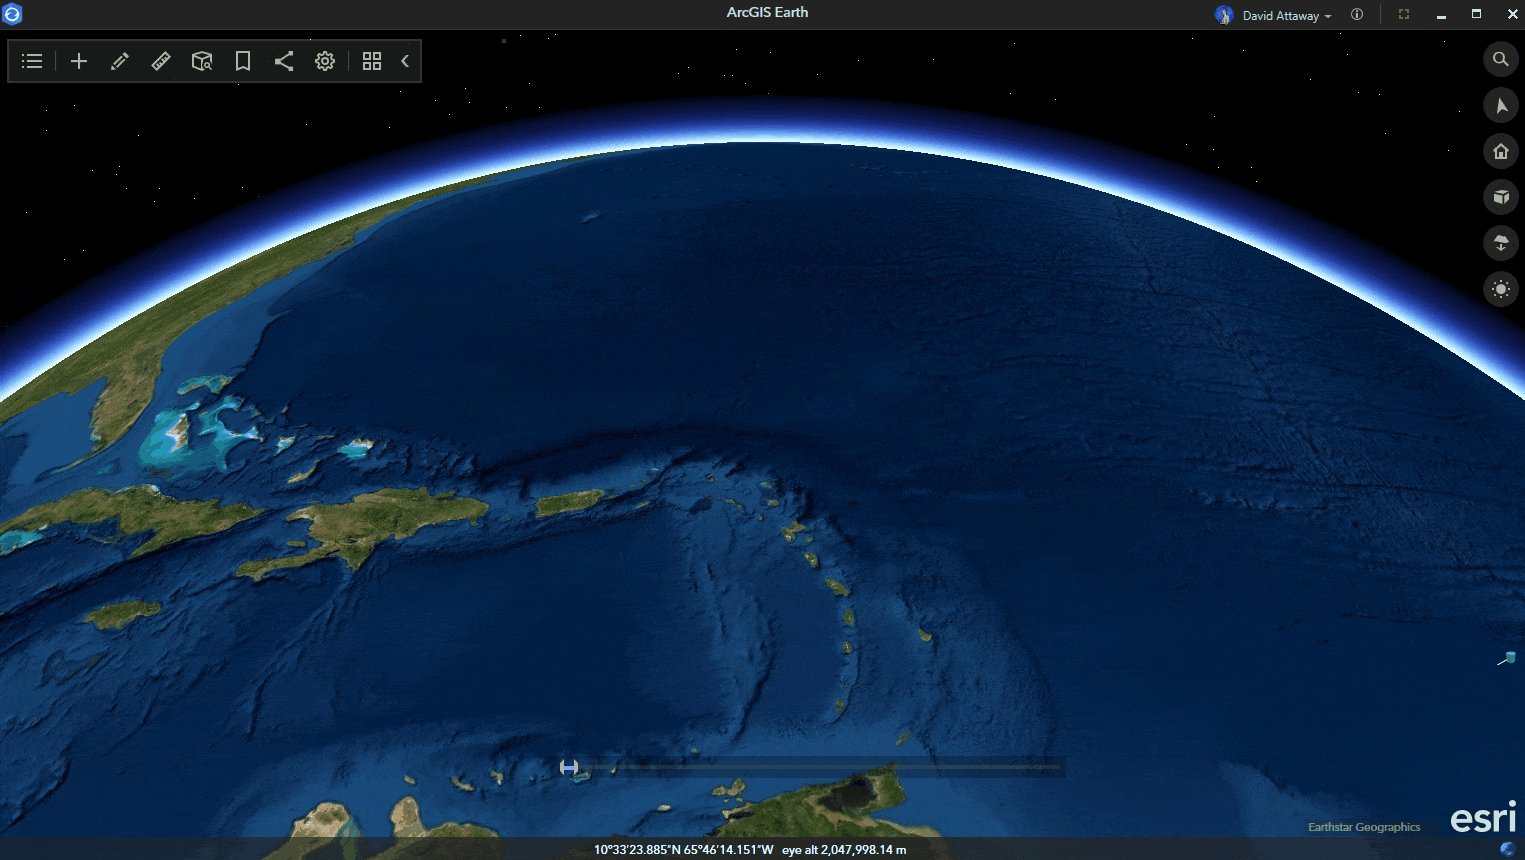 Animated GIF displaying data points as pins being dropped on a 3D globe to track the path of Hurricane Dorian